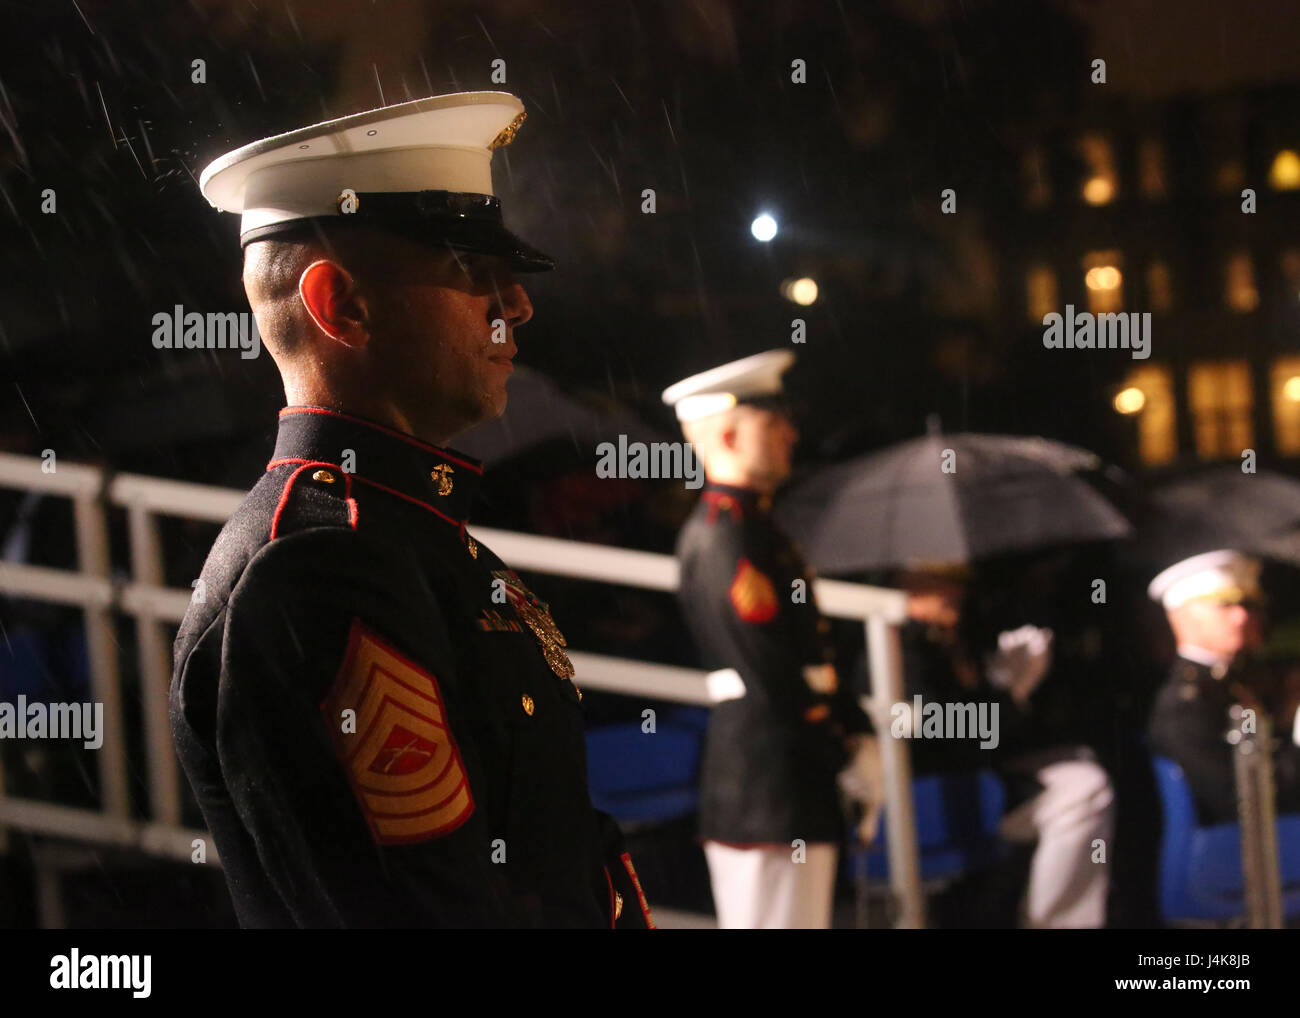 Master Sgt. Hector Vicente, parade staff senior, stands at ceremonial position during a Friday Evening Parade at Marine Barracks Washington D.C., May 5, 2017. The guests of honor for the parade were the Honorable Paul Cook, California’s 8th Congressional District Congressman, the Honorable Jack Bergman, Michigan’s 1st Congressional District Congressman, and the Honorable Salud Carbajal, California’s 24th Congressional District Congressman. The hosting official was Gen. Glenn Walters, assistant commandant of the Marine Corps.(Official Marine Corps photo by Lance Cpl. Damon Mclean/Released) Stock Photo